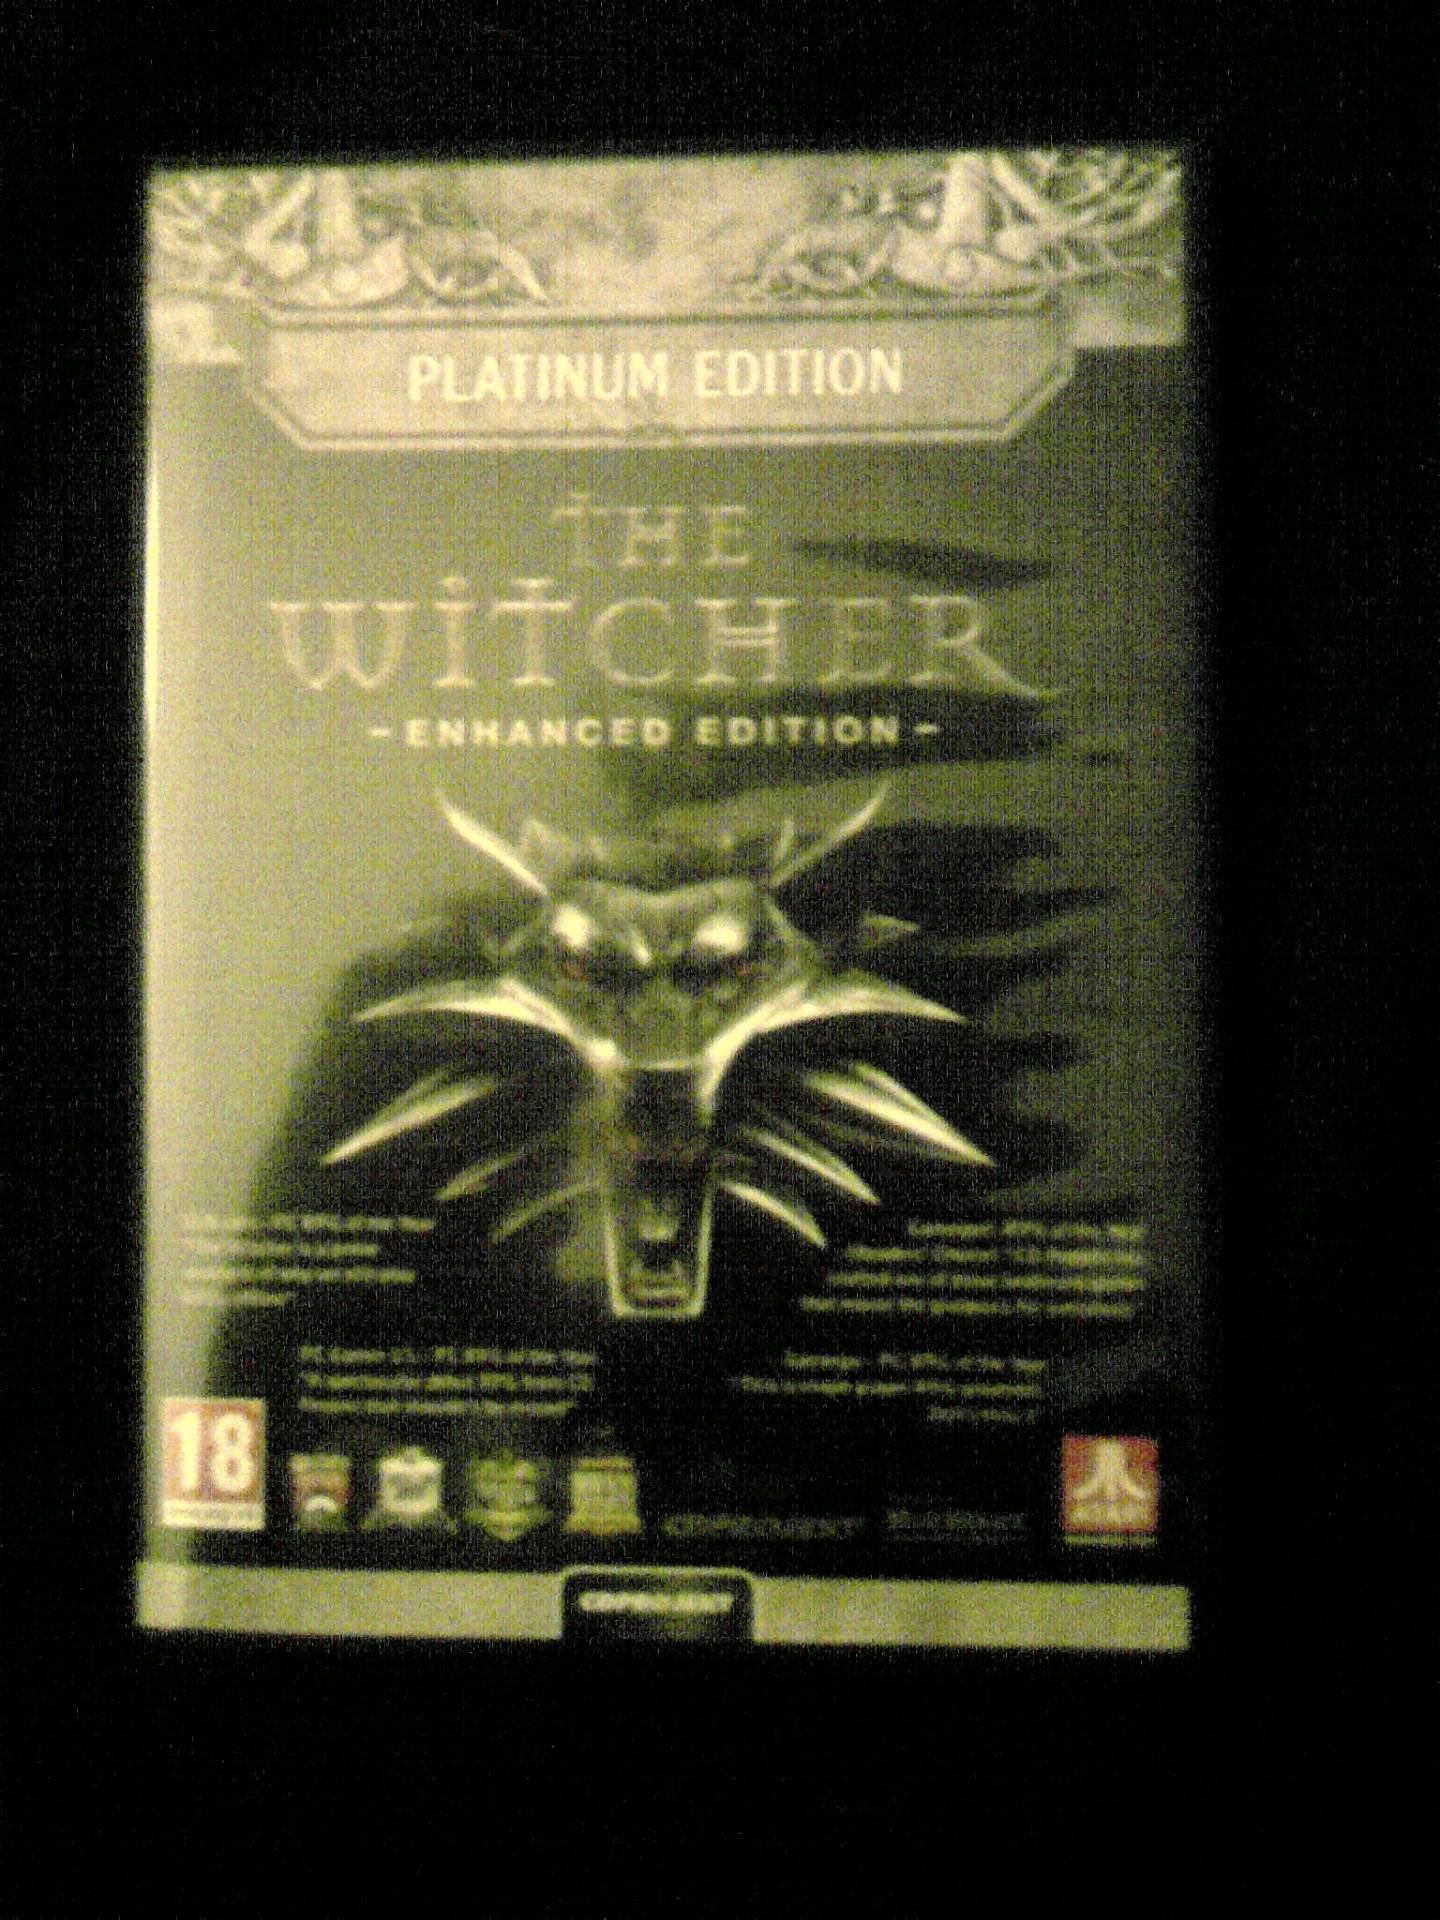 The front cover of the game case 